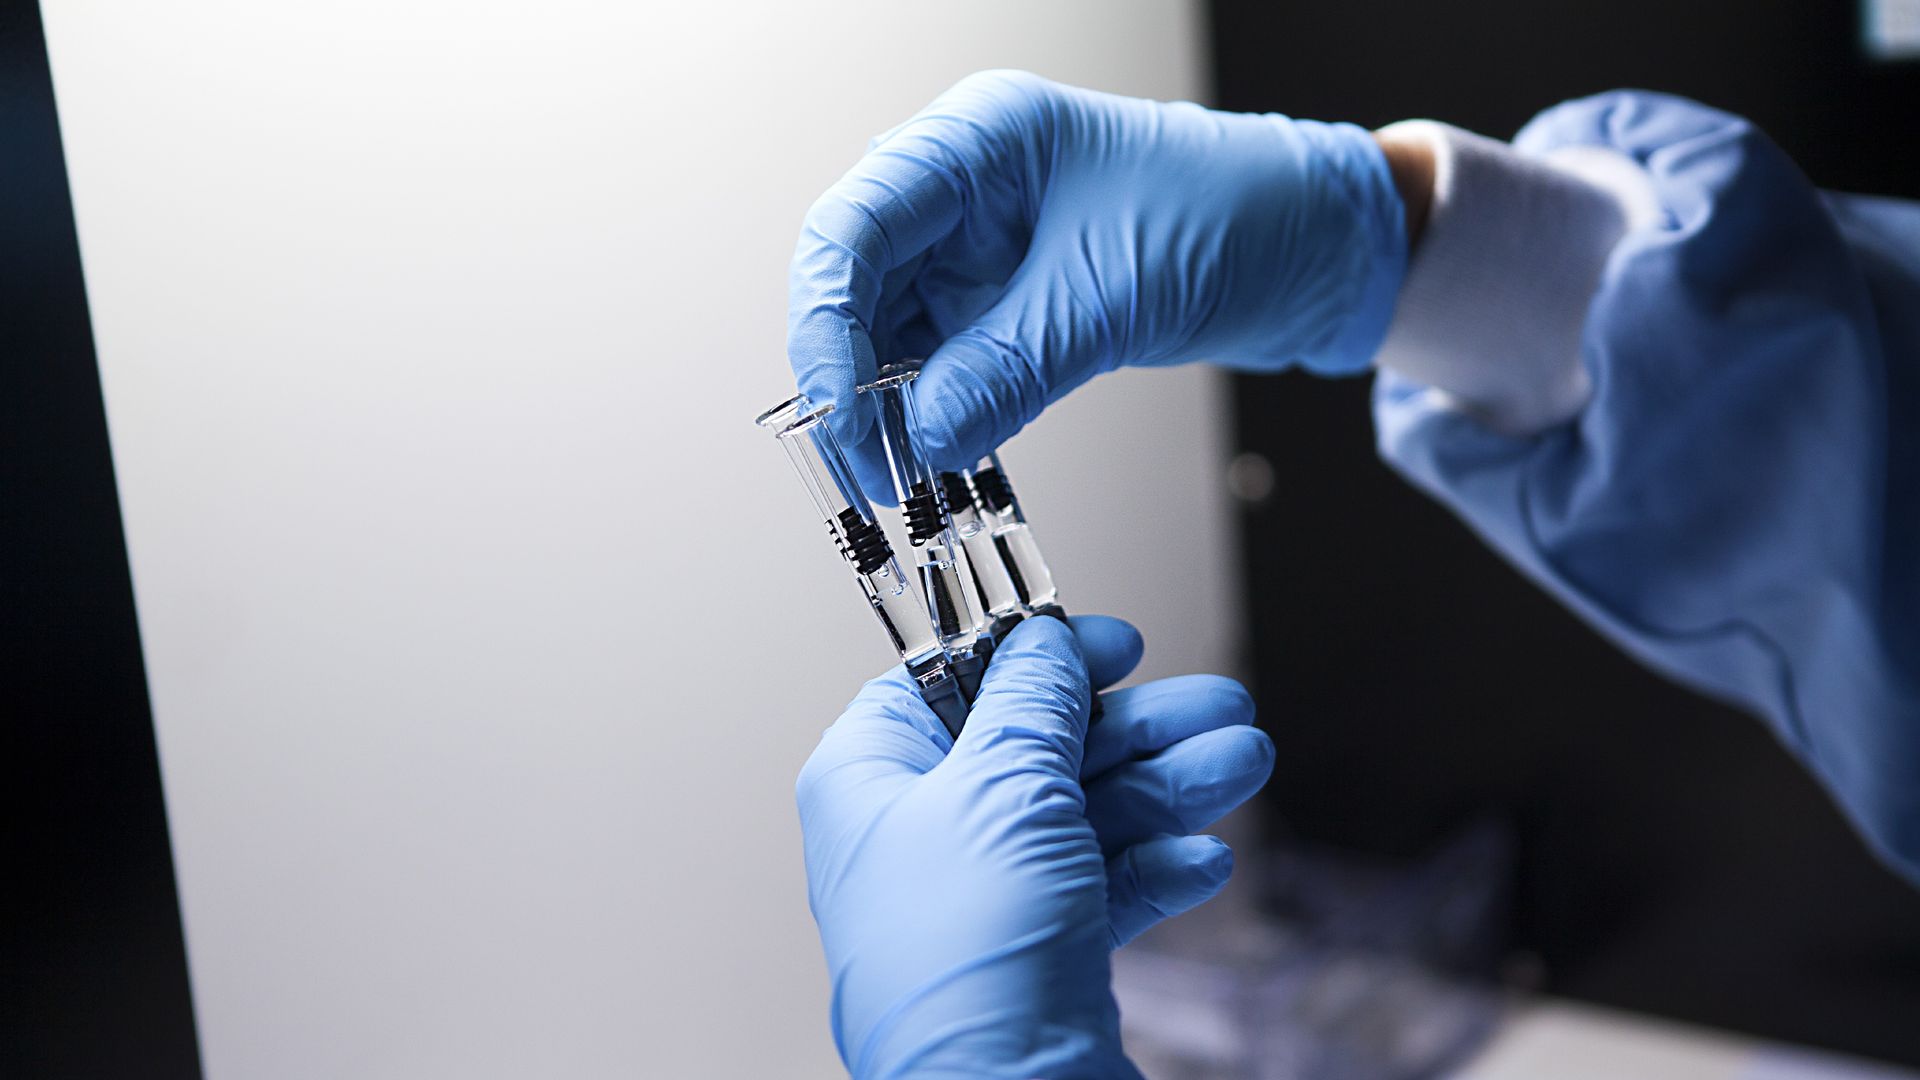 A person holds up injectable drugs in syringes.